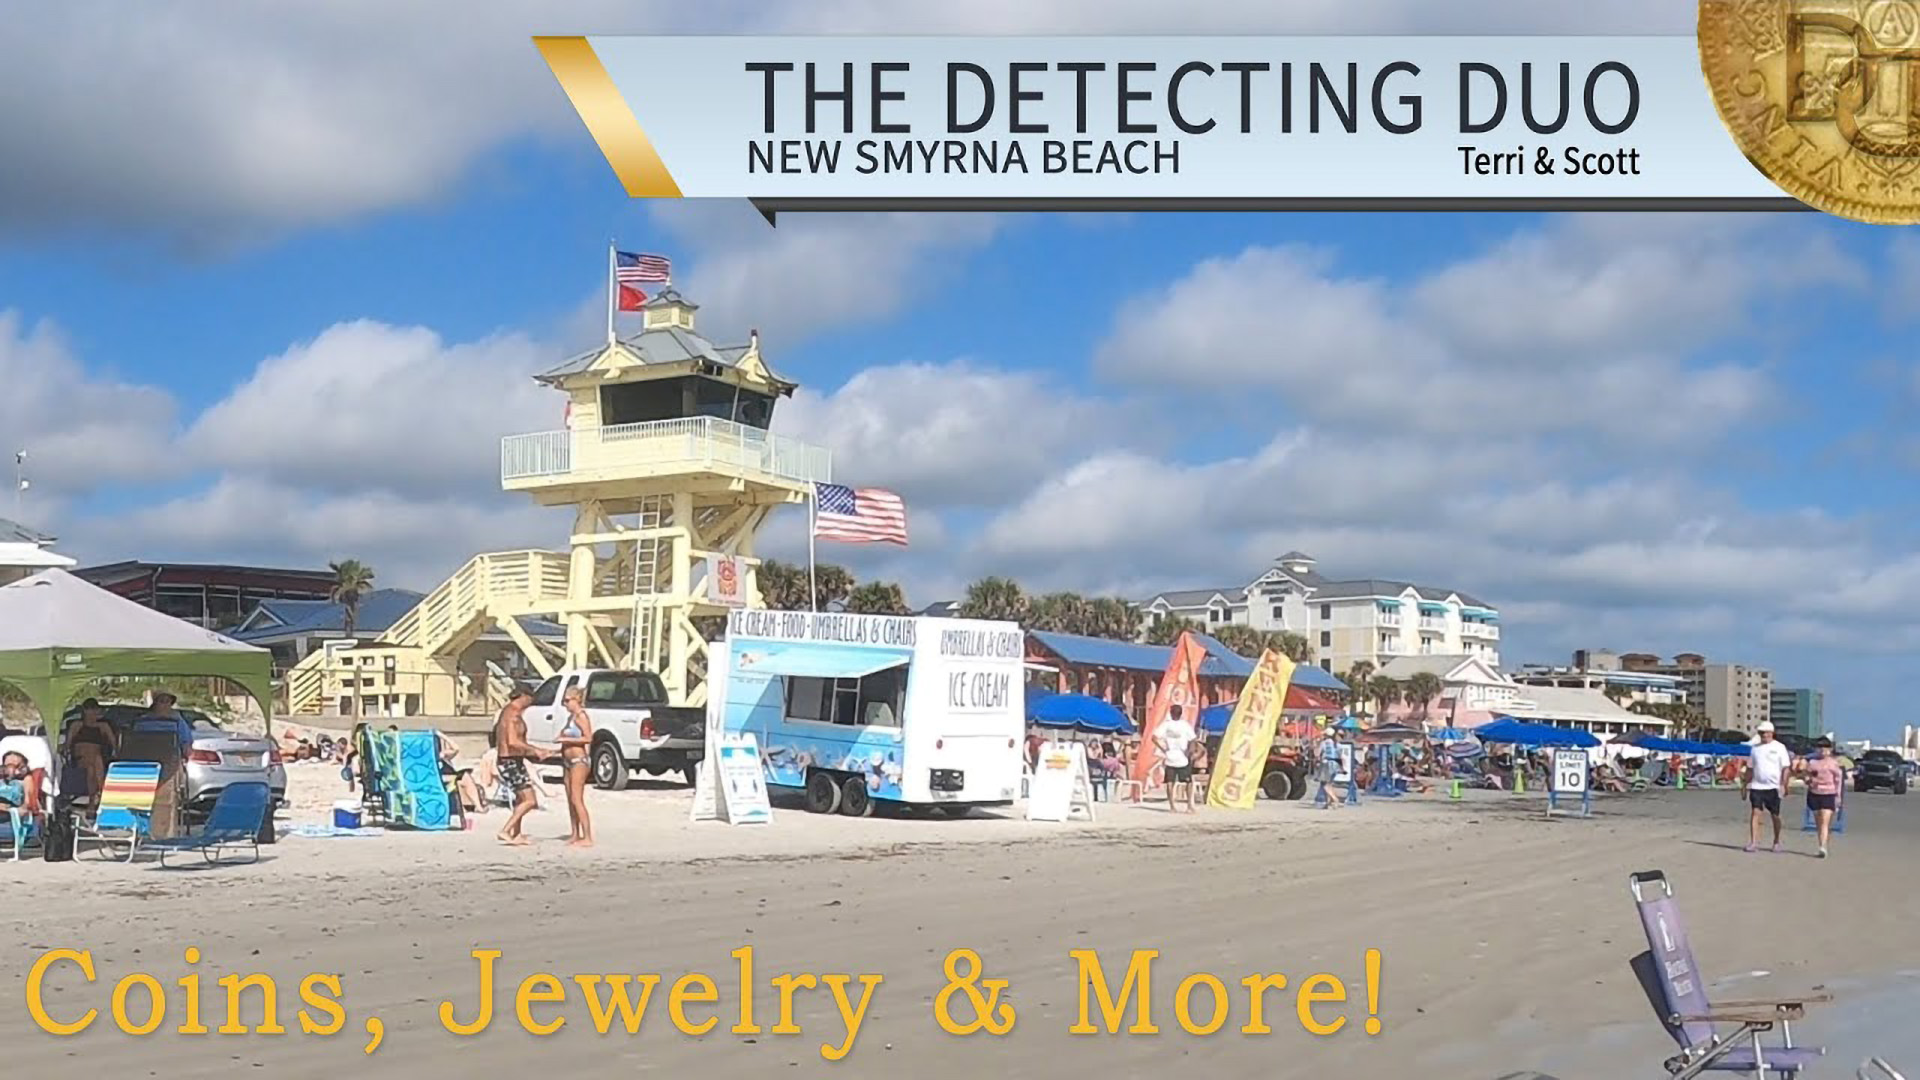 s01 e04 - Coins, Jewelry and more - Beach Metal Detecting New Smyrna Beach